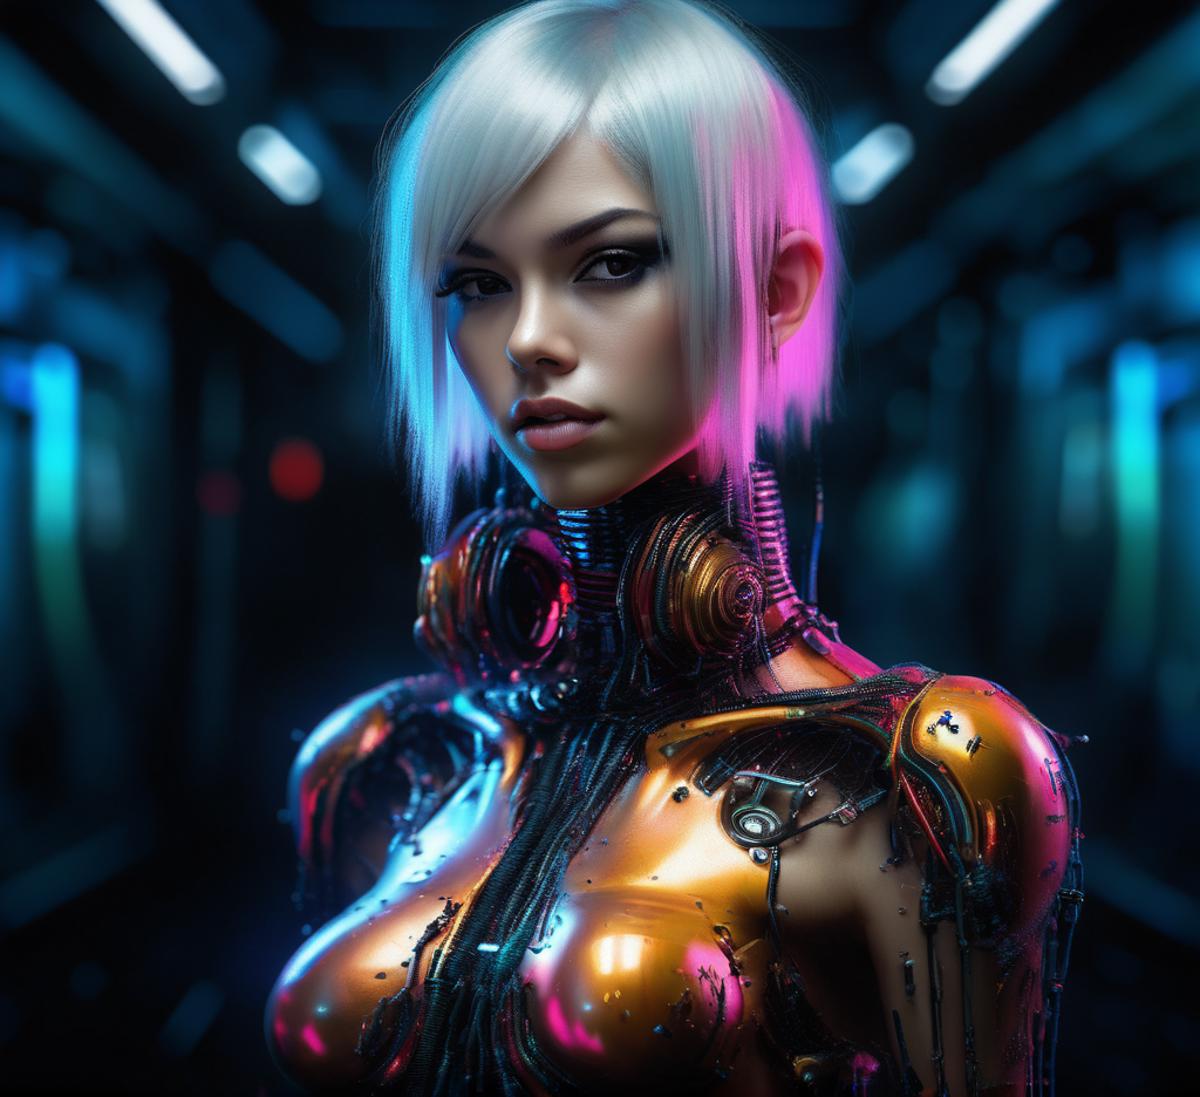 AI model image by devall54a266